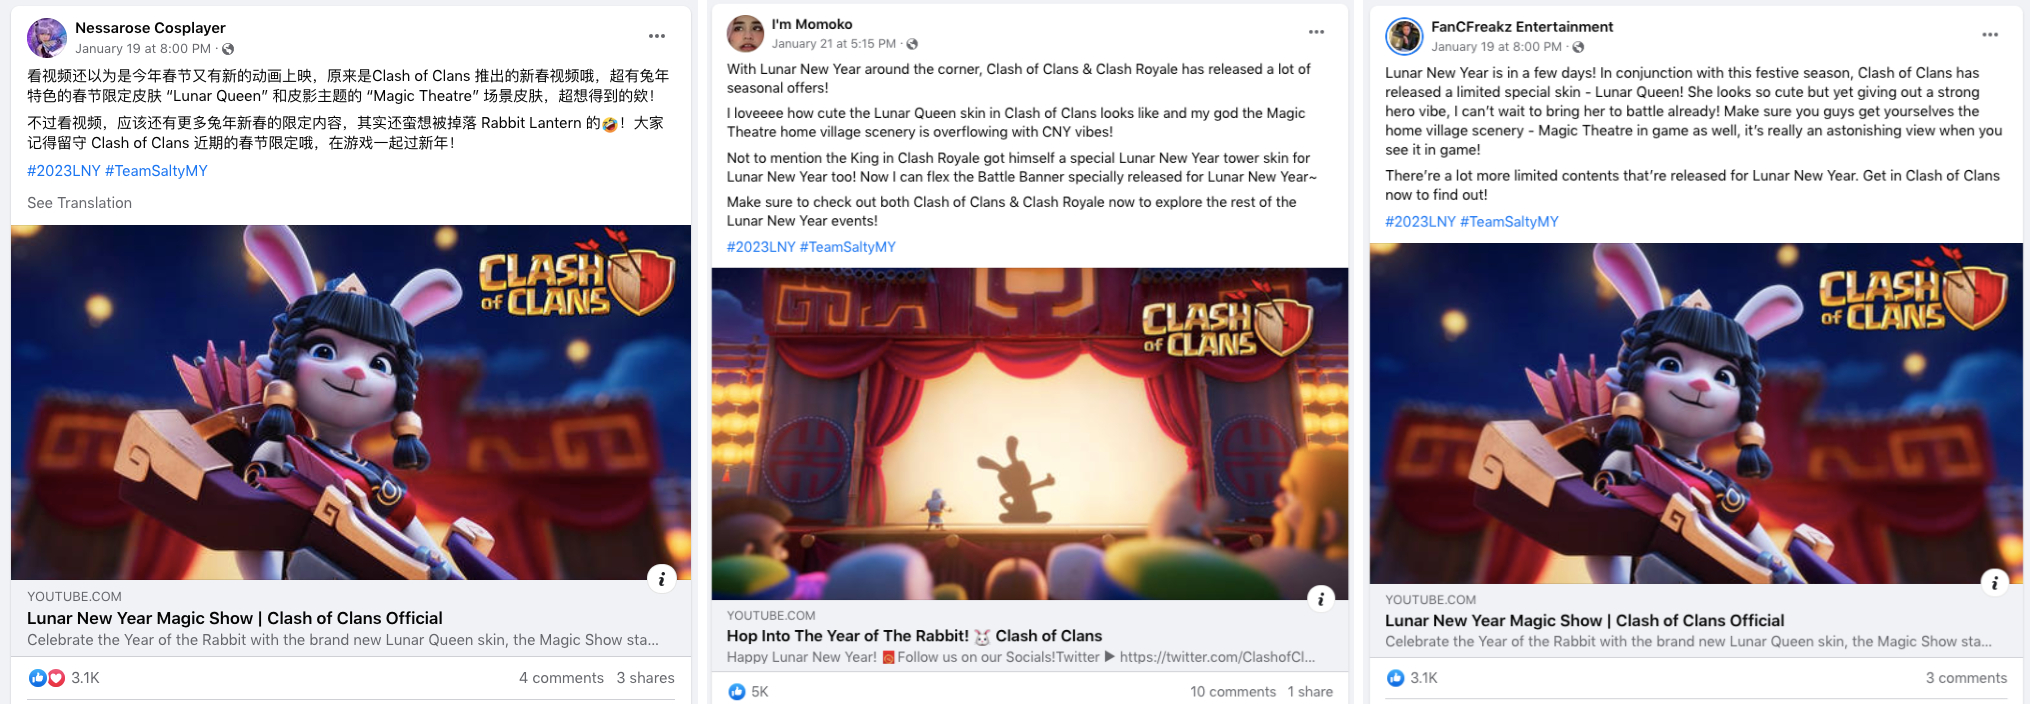 Clash Of Clans Celebrated Year Of The Rabbit With Massive Online & Offline Events 14